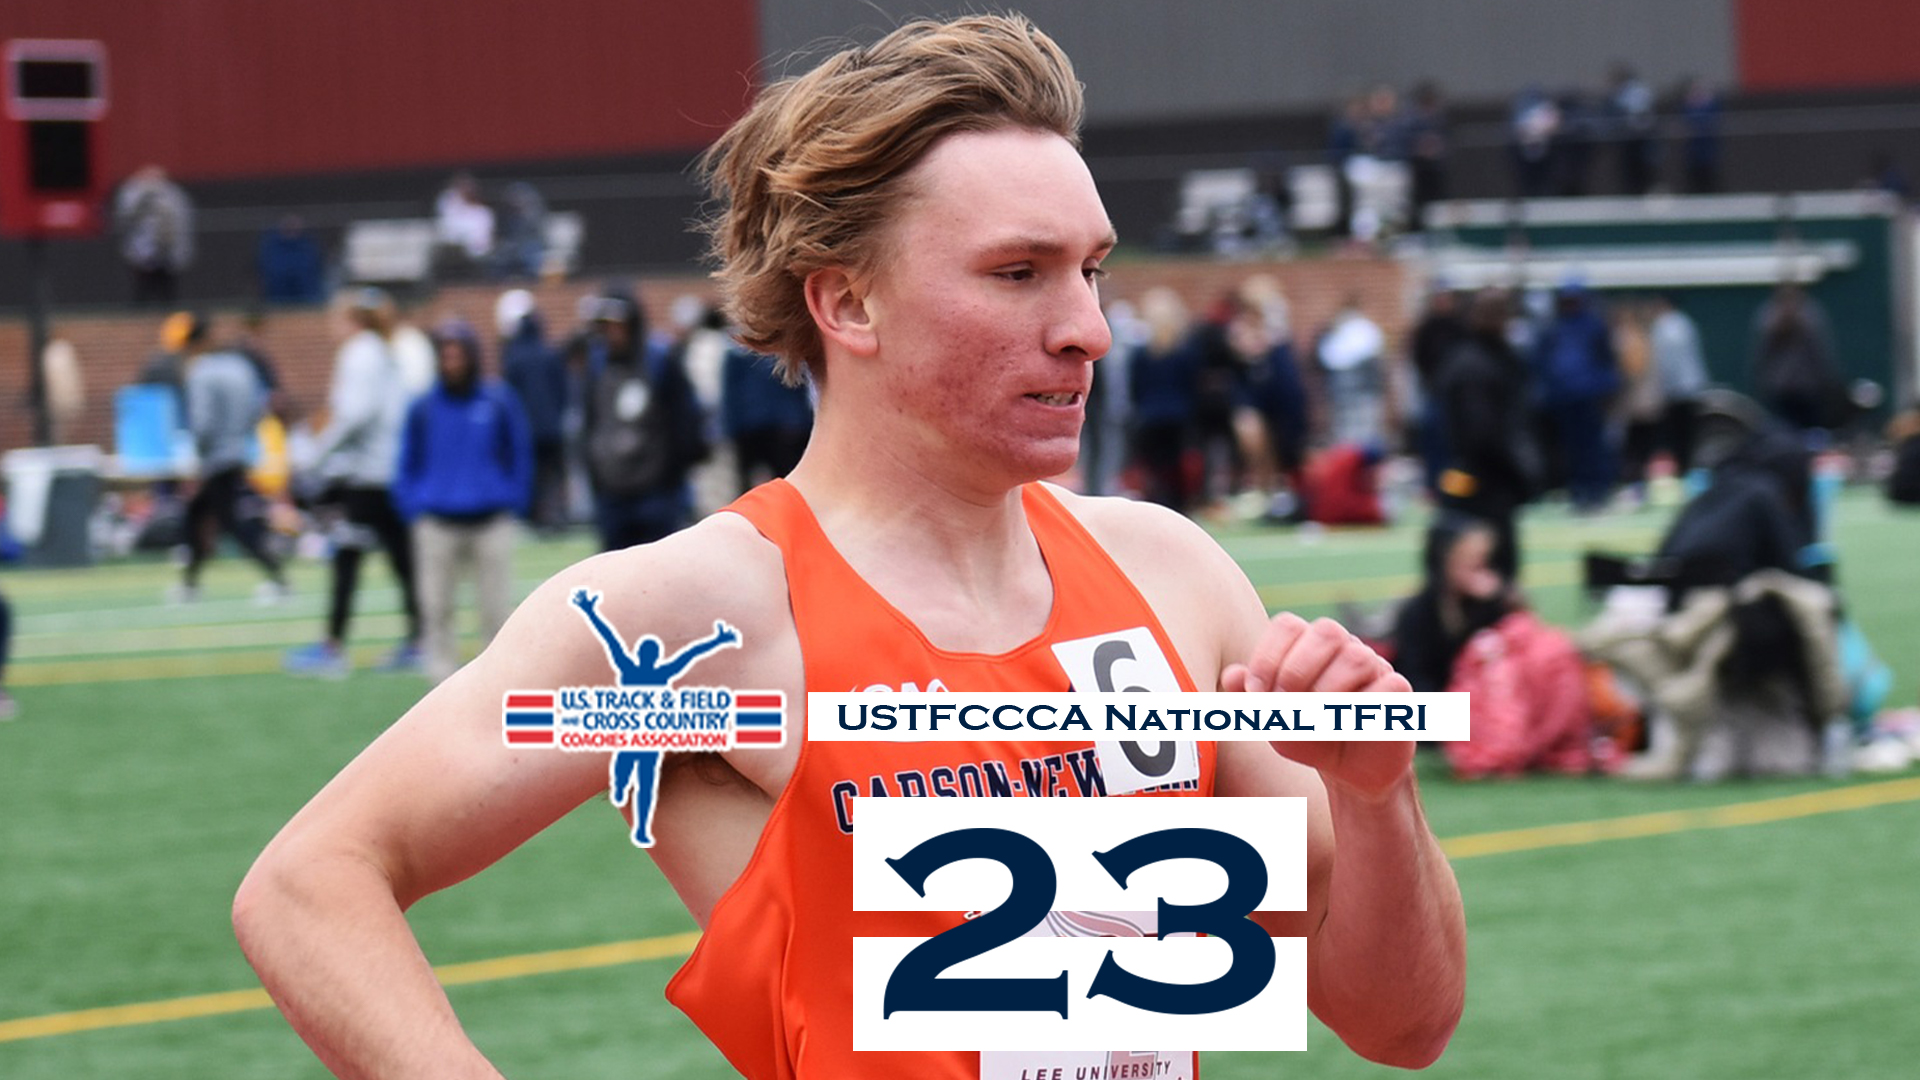 Carson-Newman men sit tight at 23rd in USTFCCCA national rankings